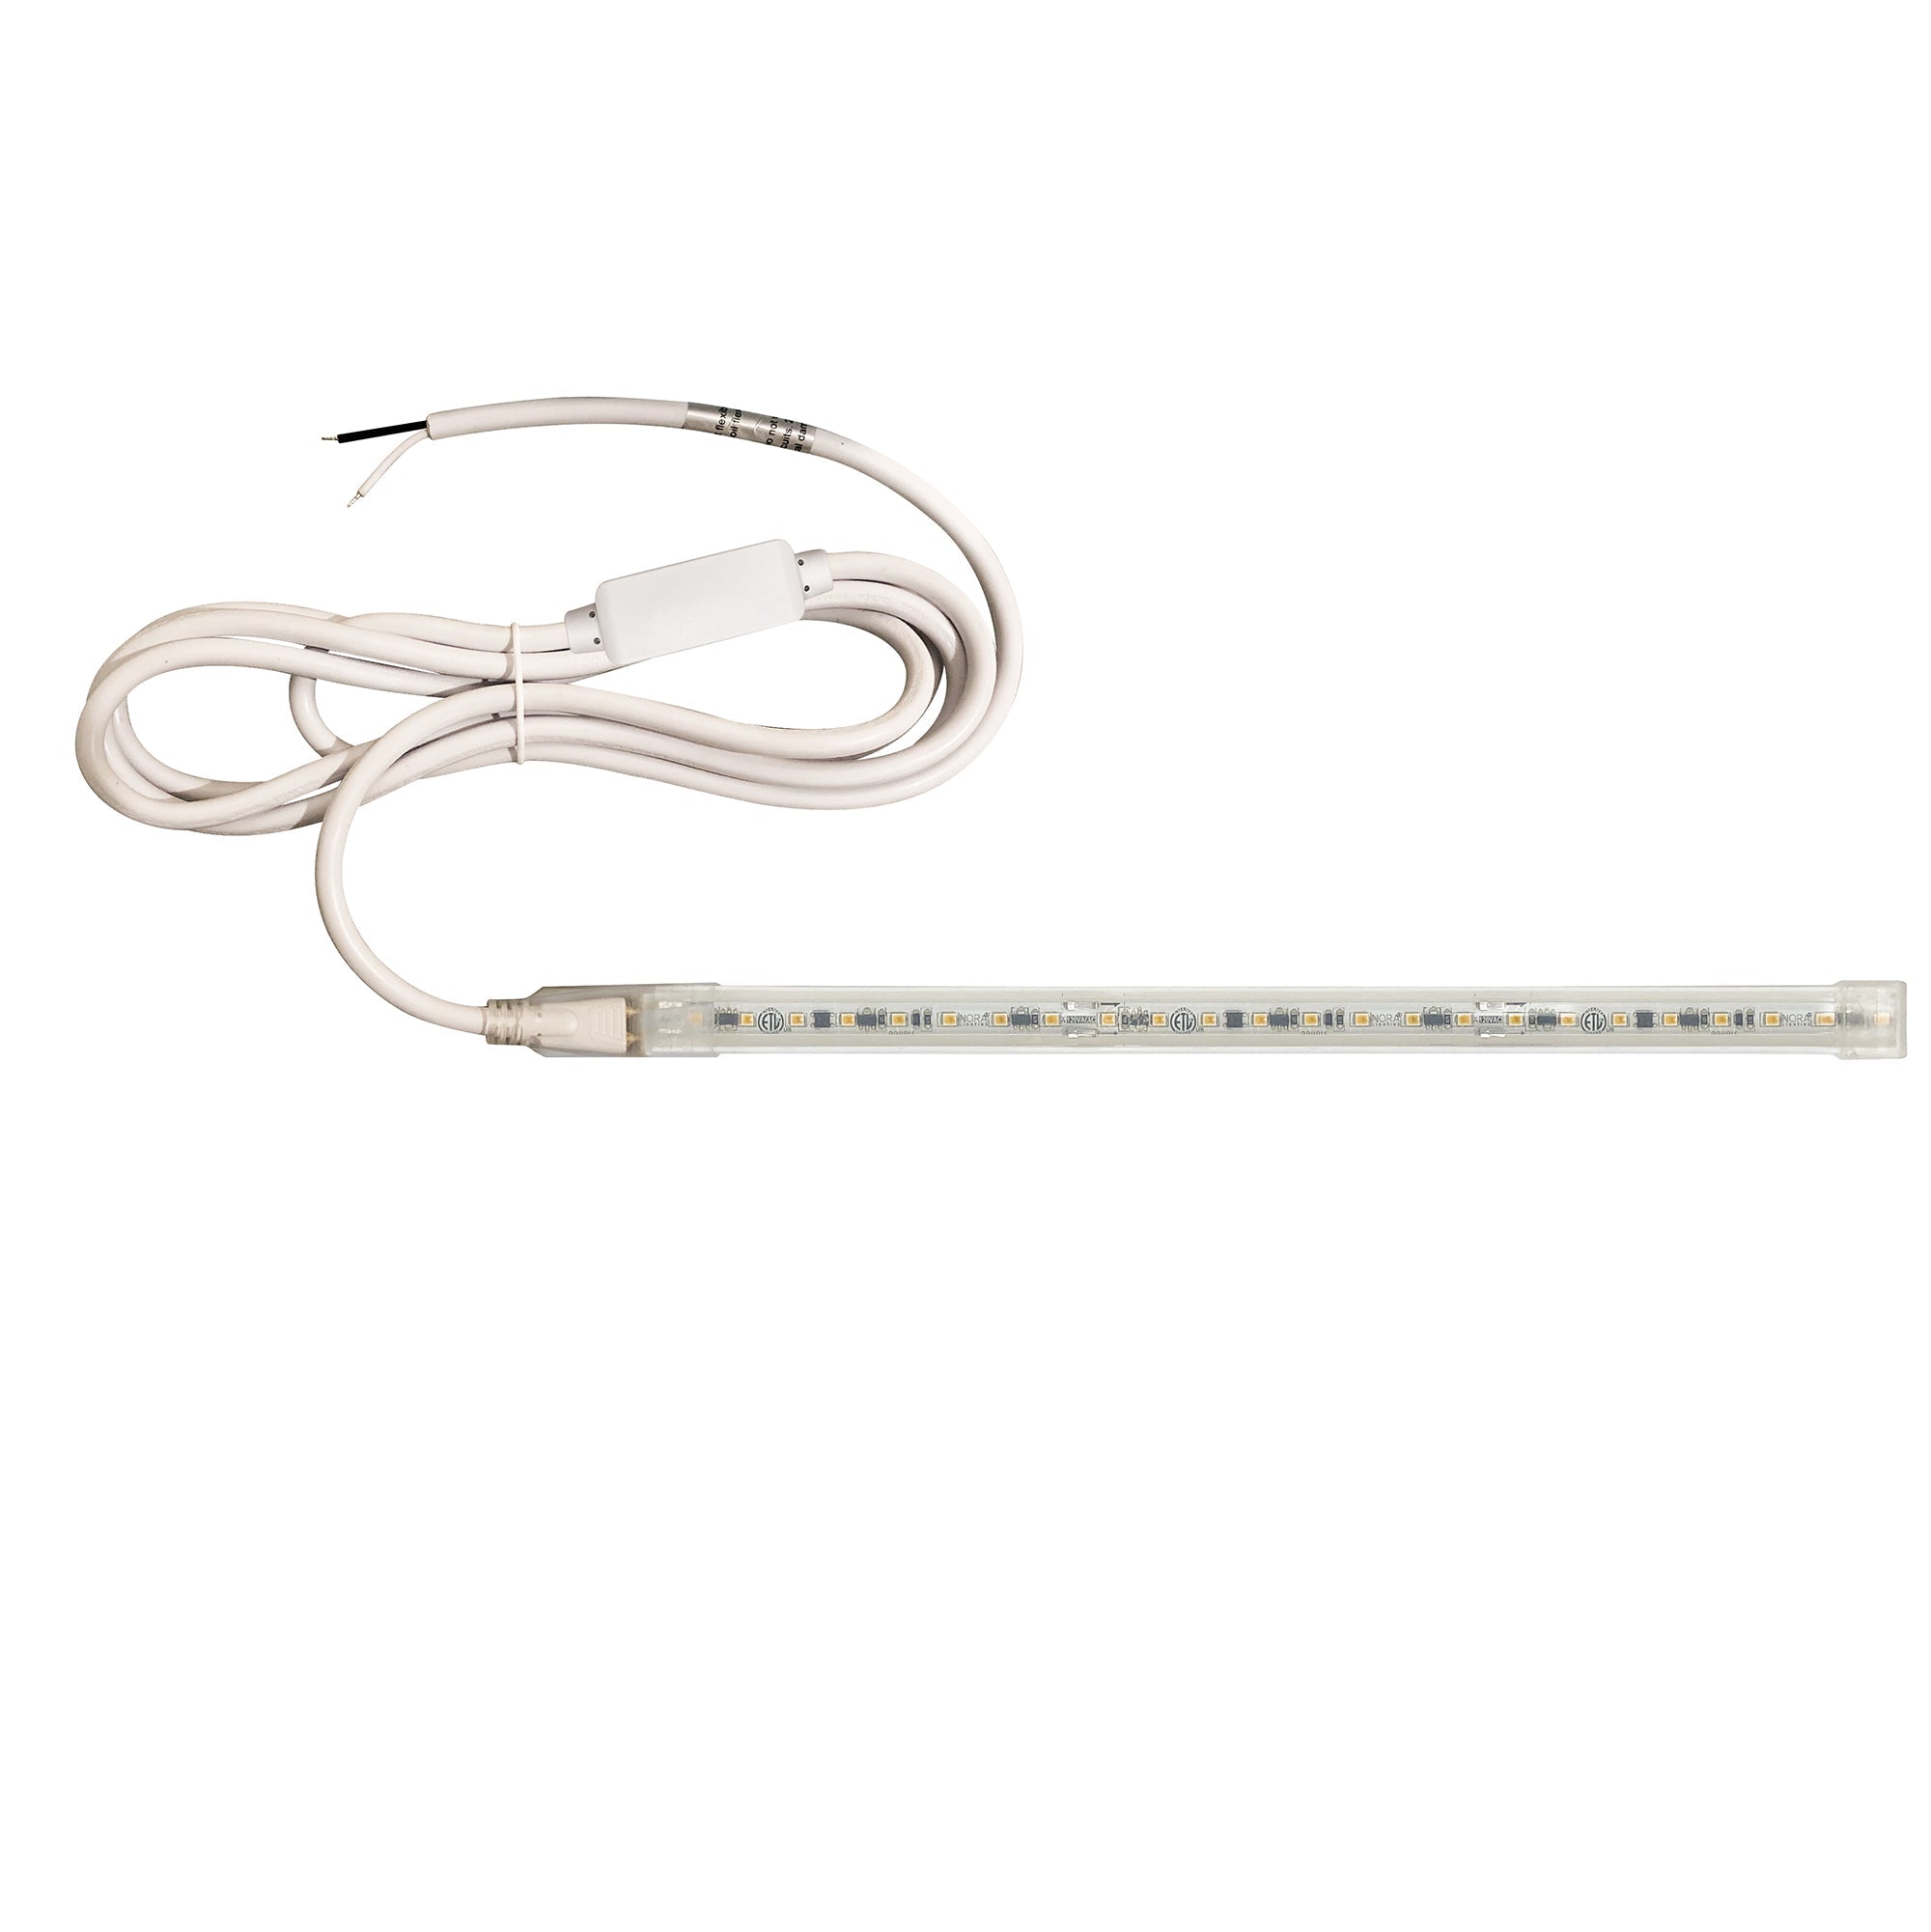 Nora Lighting NUTP13-W11-4-12-930/HWSP - Accent / Undercabinet - Custom Cut 11-ft, 4-in 120V Continuous LED Tape Light, 330lm / 3.6W per foot, 3000K, w/ Mounting Clips and 8' Hardwired Power Cord w/ Surge Protector